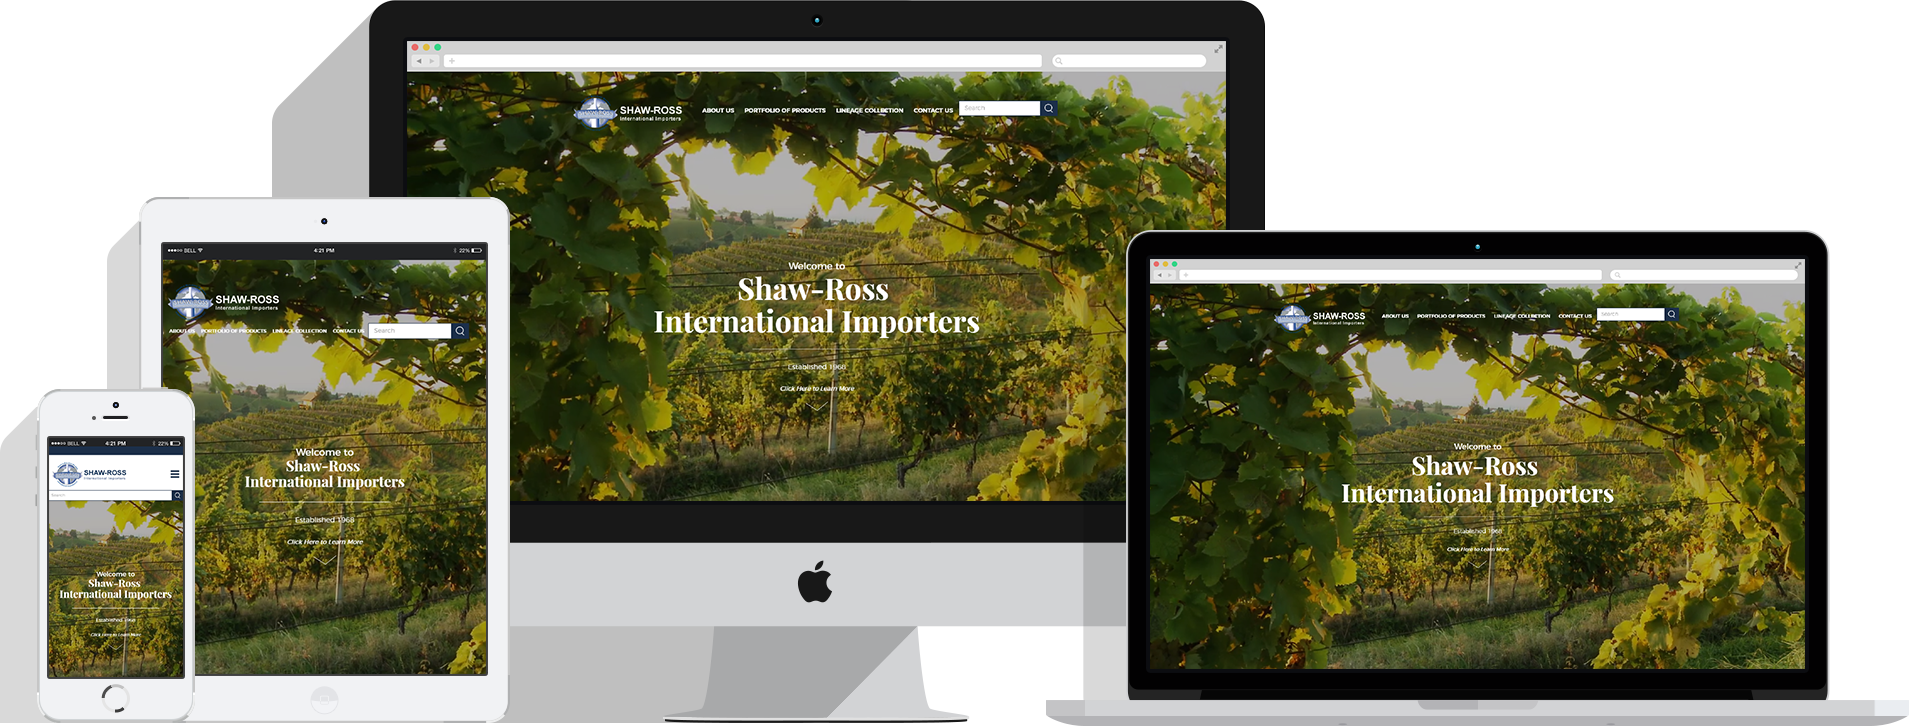 Shaw-Ross International Importers, LLC website home page